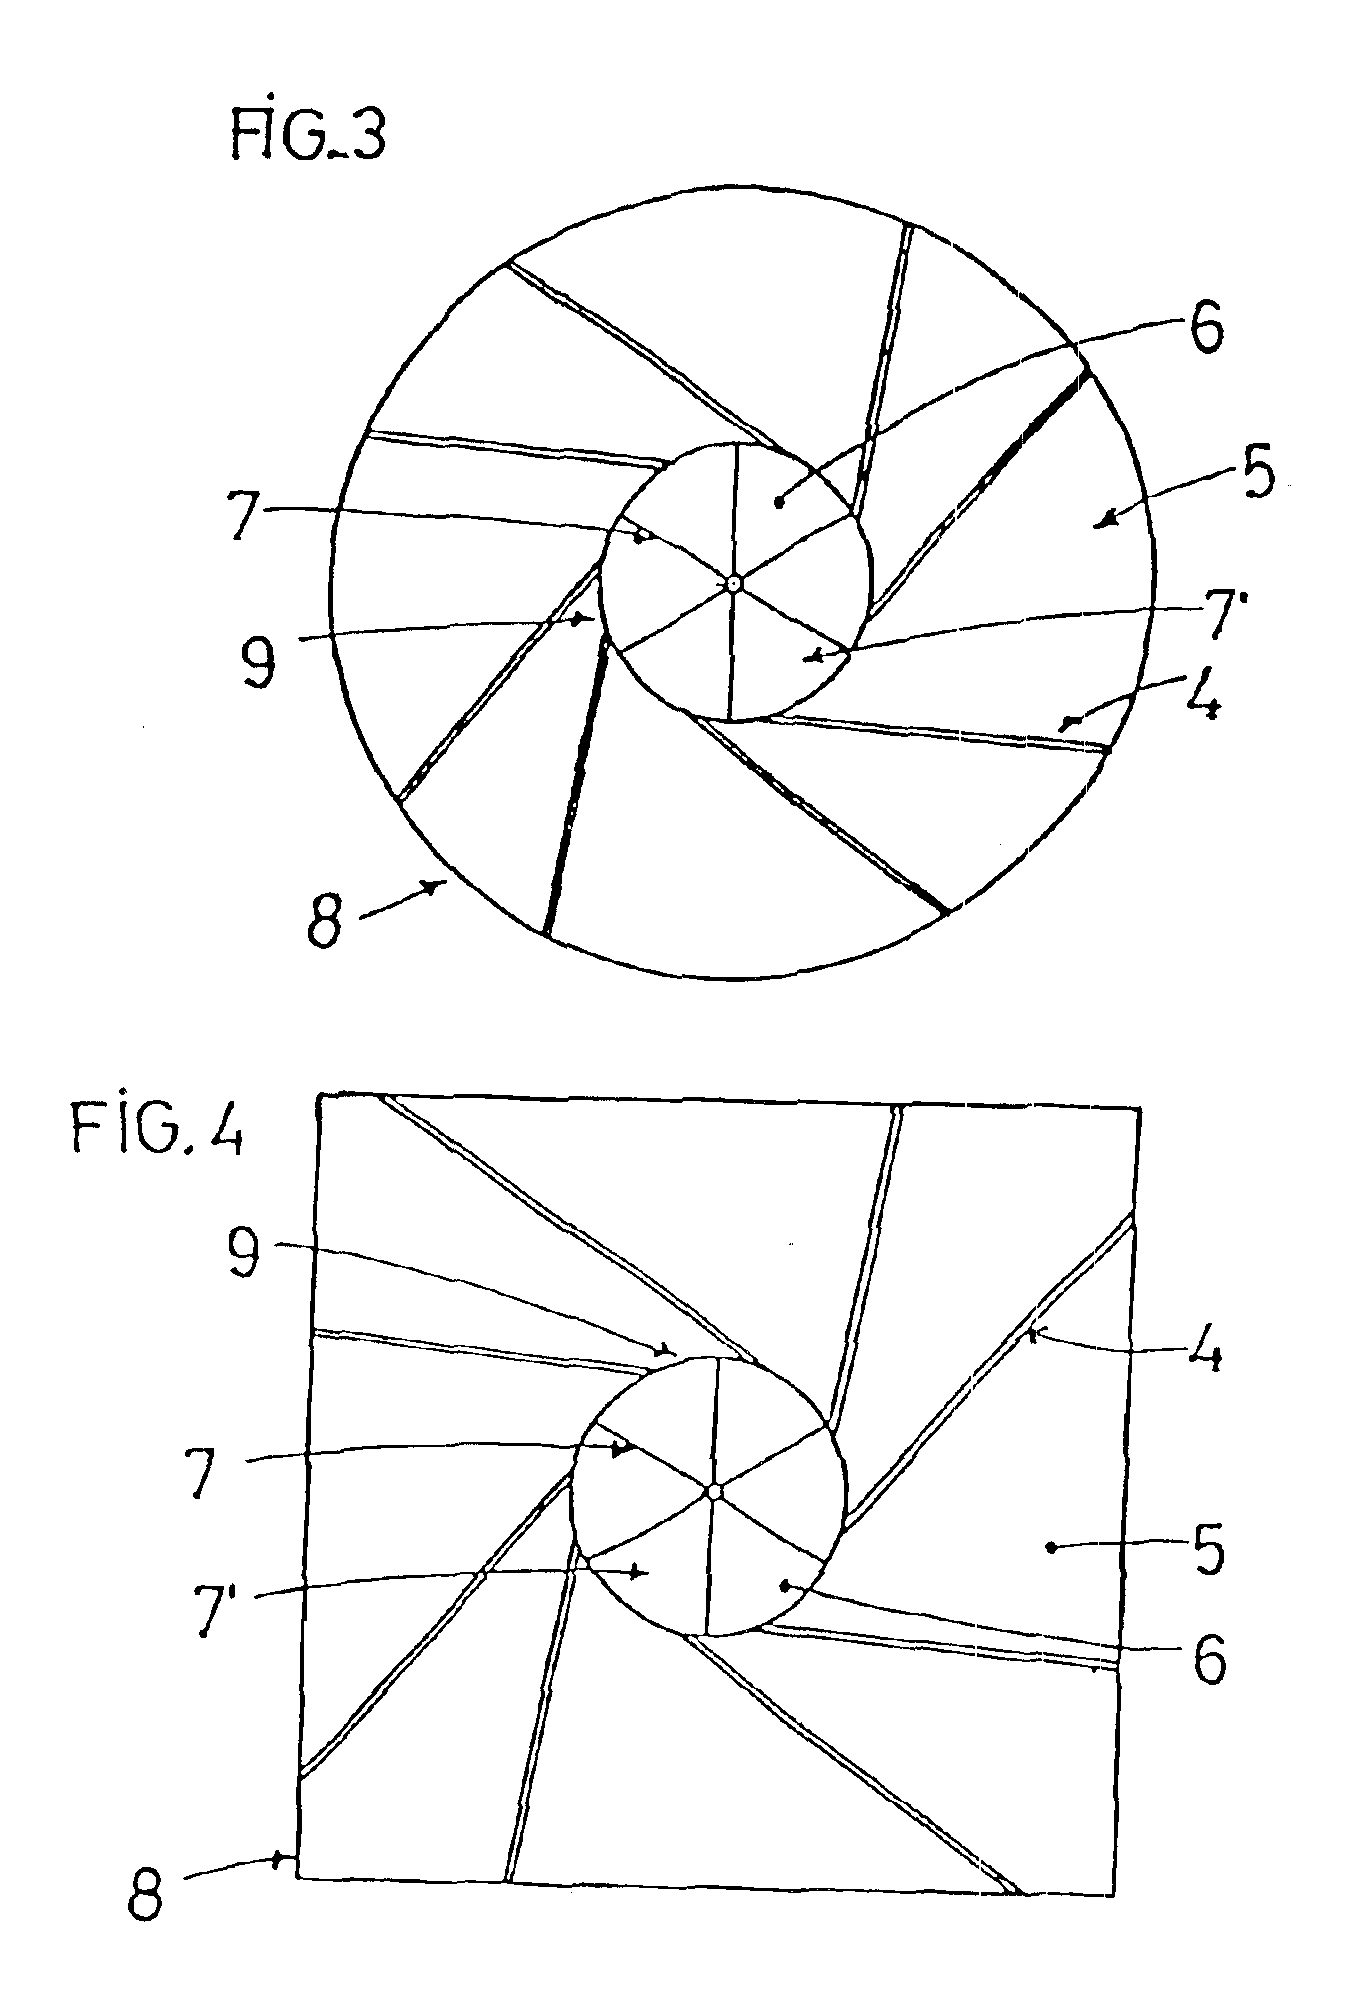 Wind power generator having wind channeling body with progressively reduced section